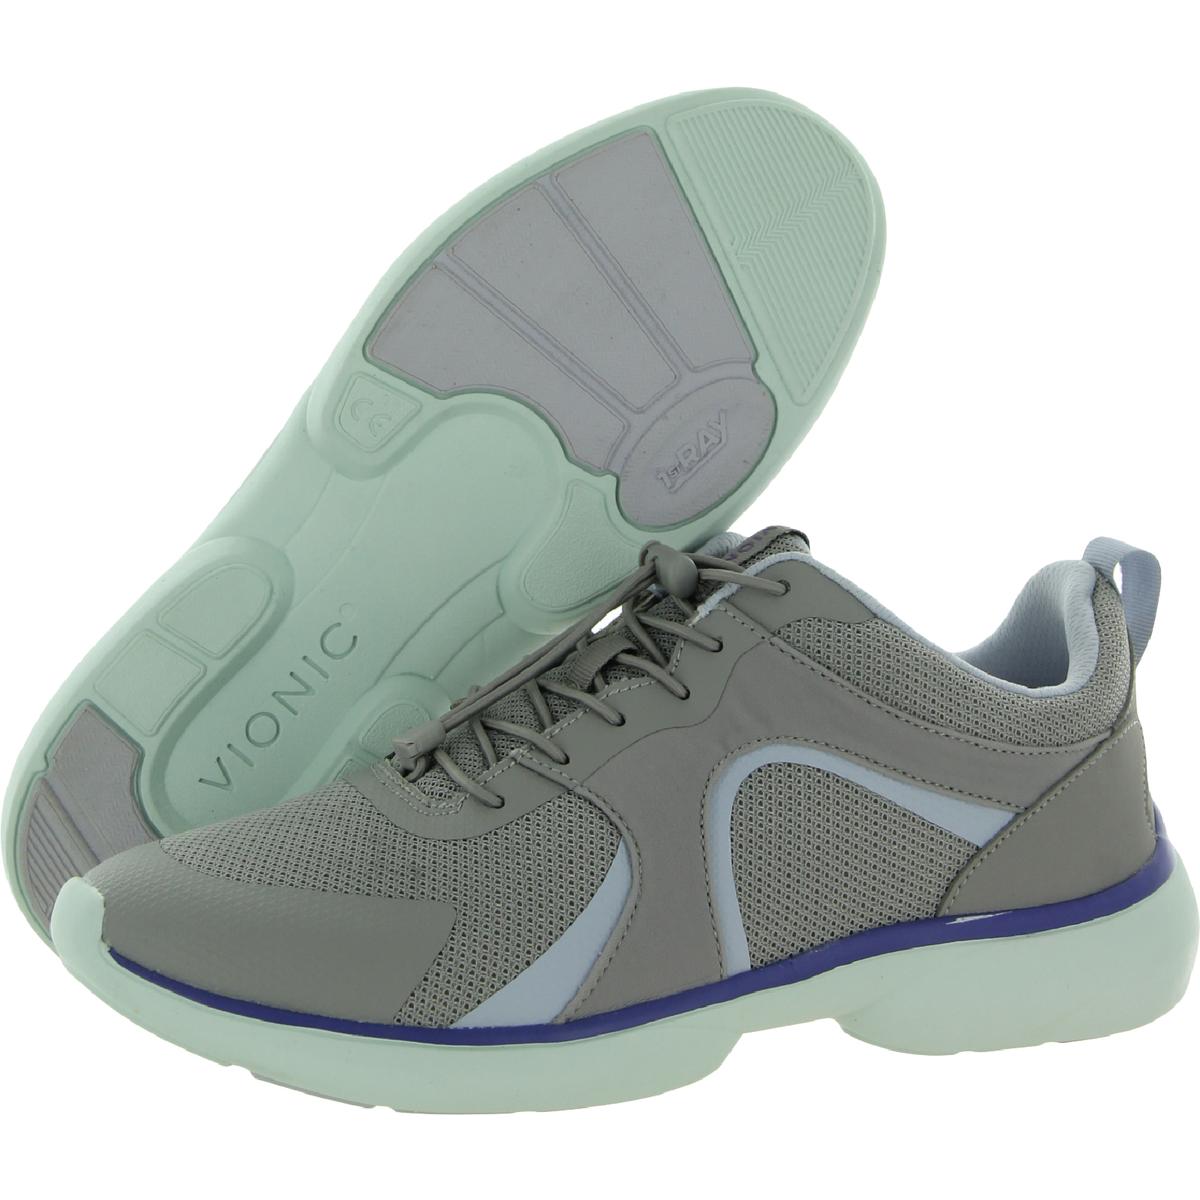 Vionic Womens Olessa Gray Running Shoes Sneakers 6 Wide (C,D,W) BHFO 6840